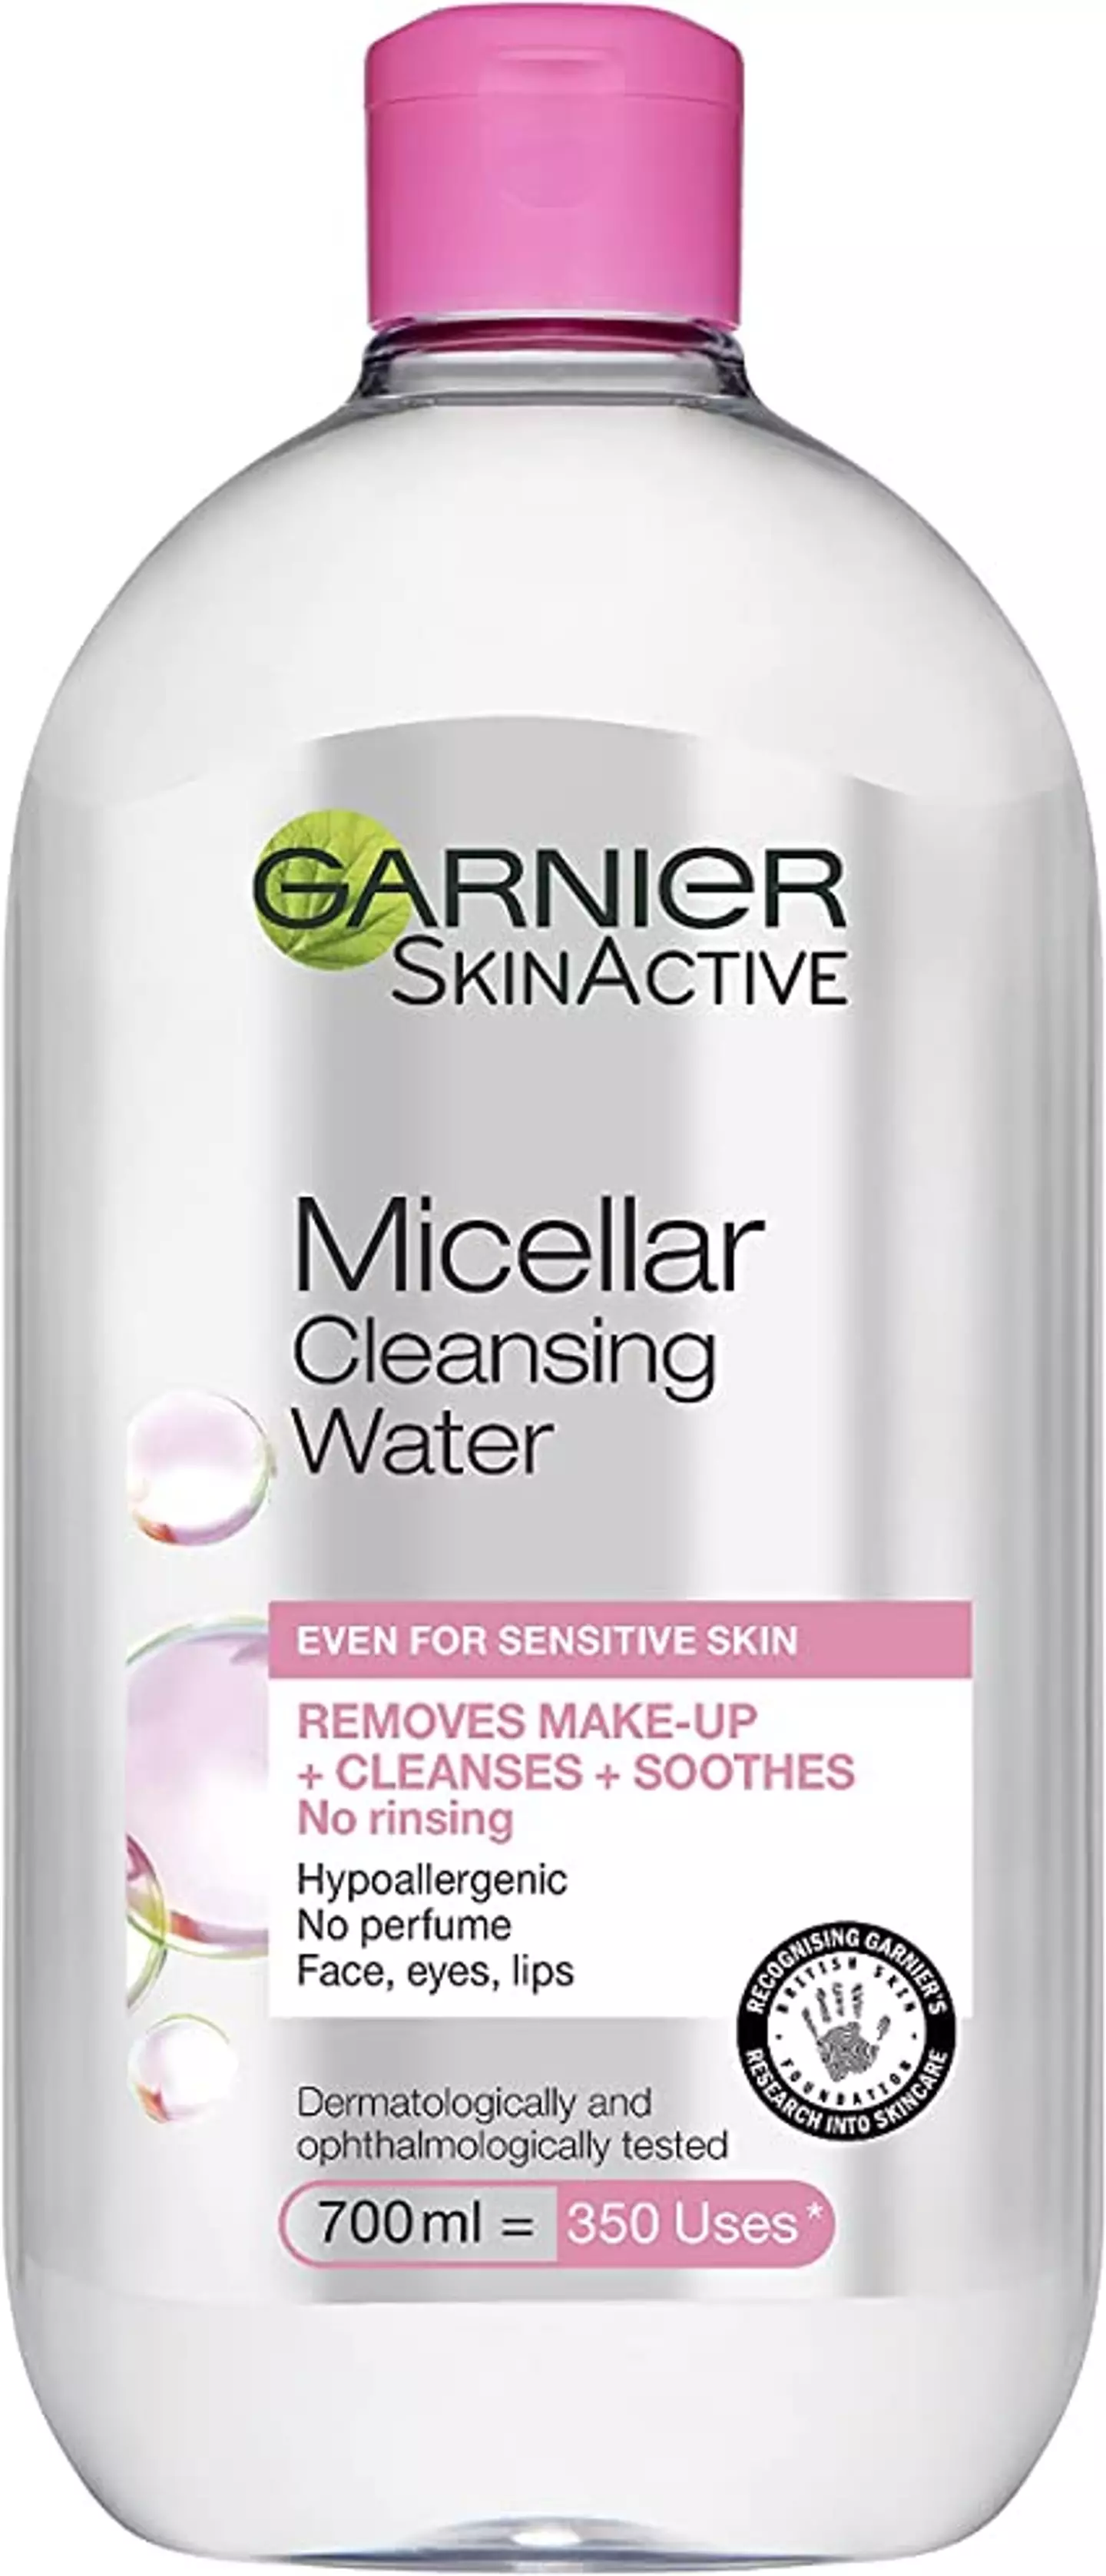 Garnier micellar water can be purchased on the high street for as little as £1.